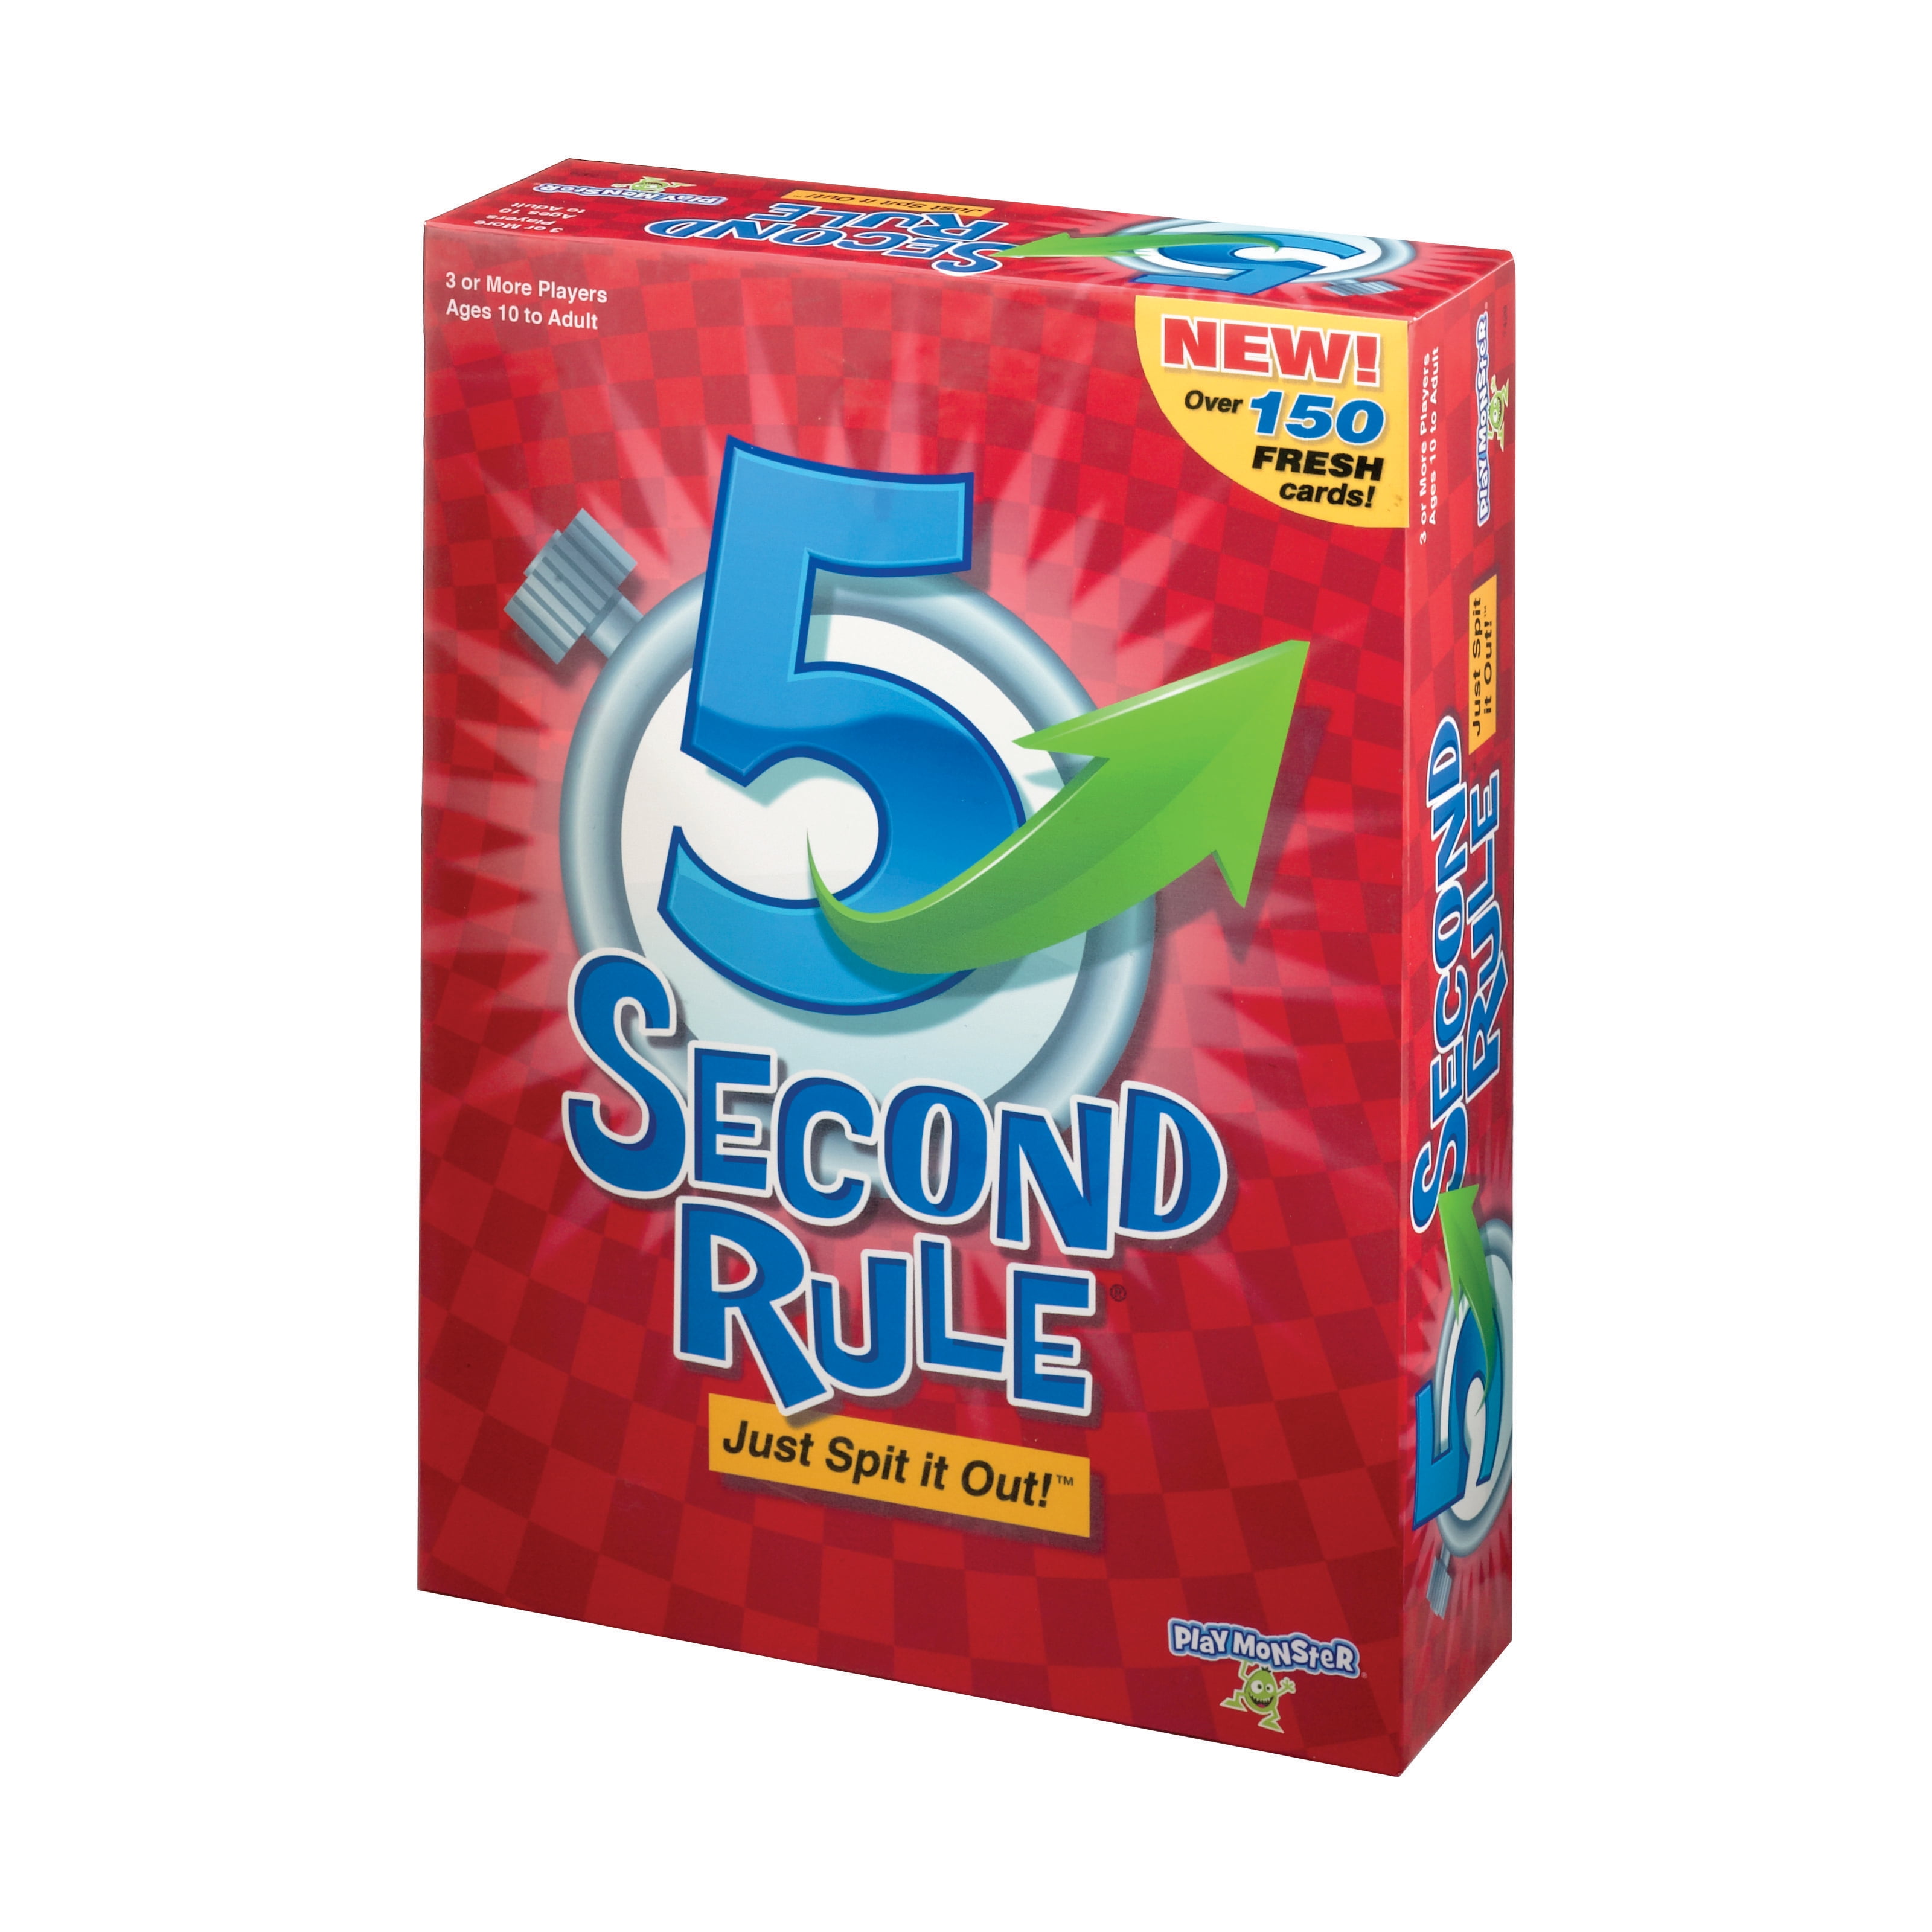 5 Second Rule Board Game